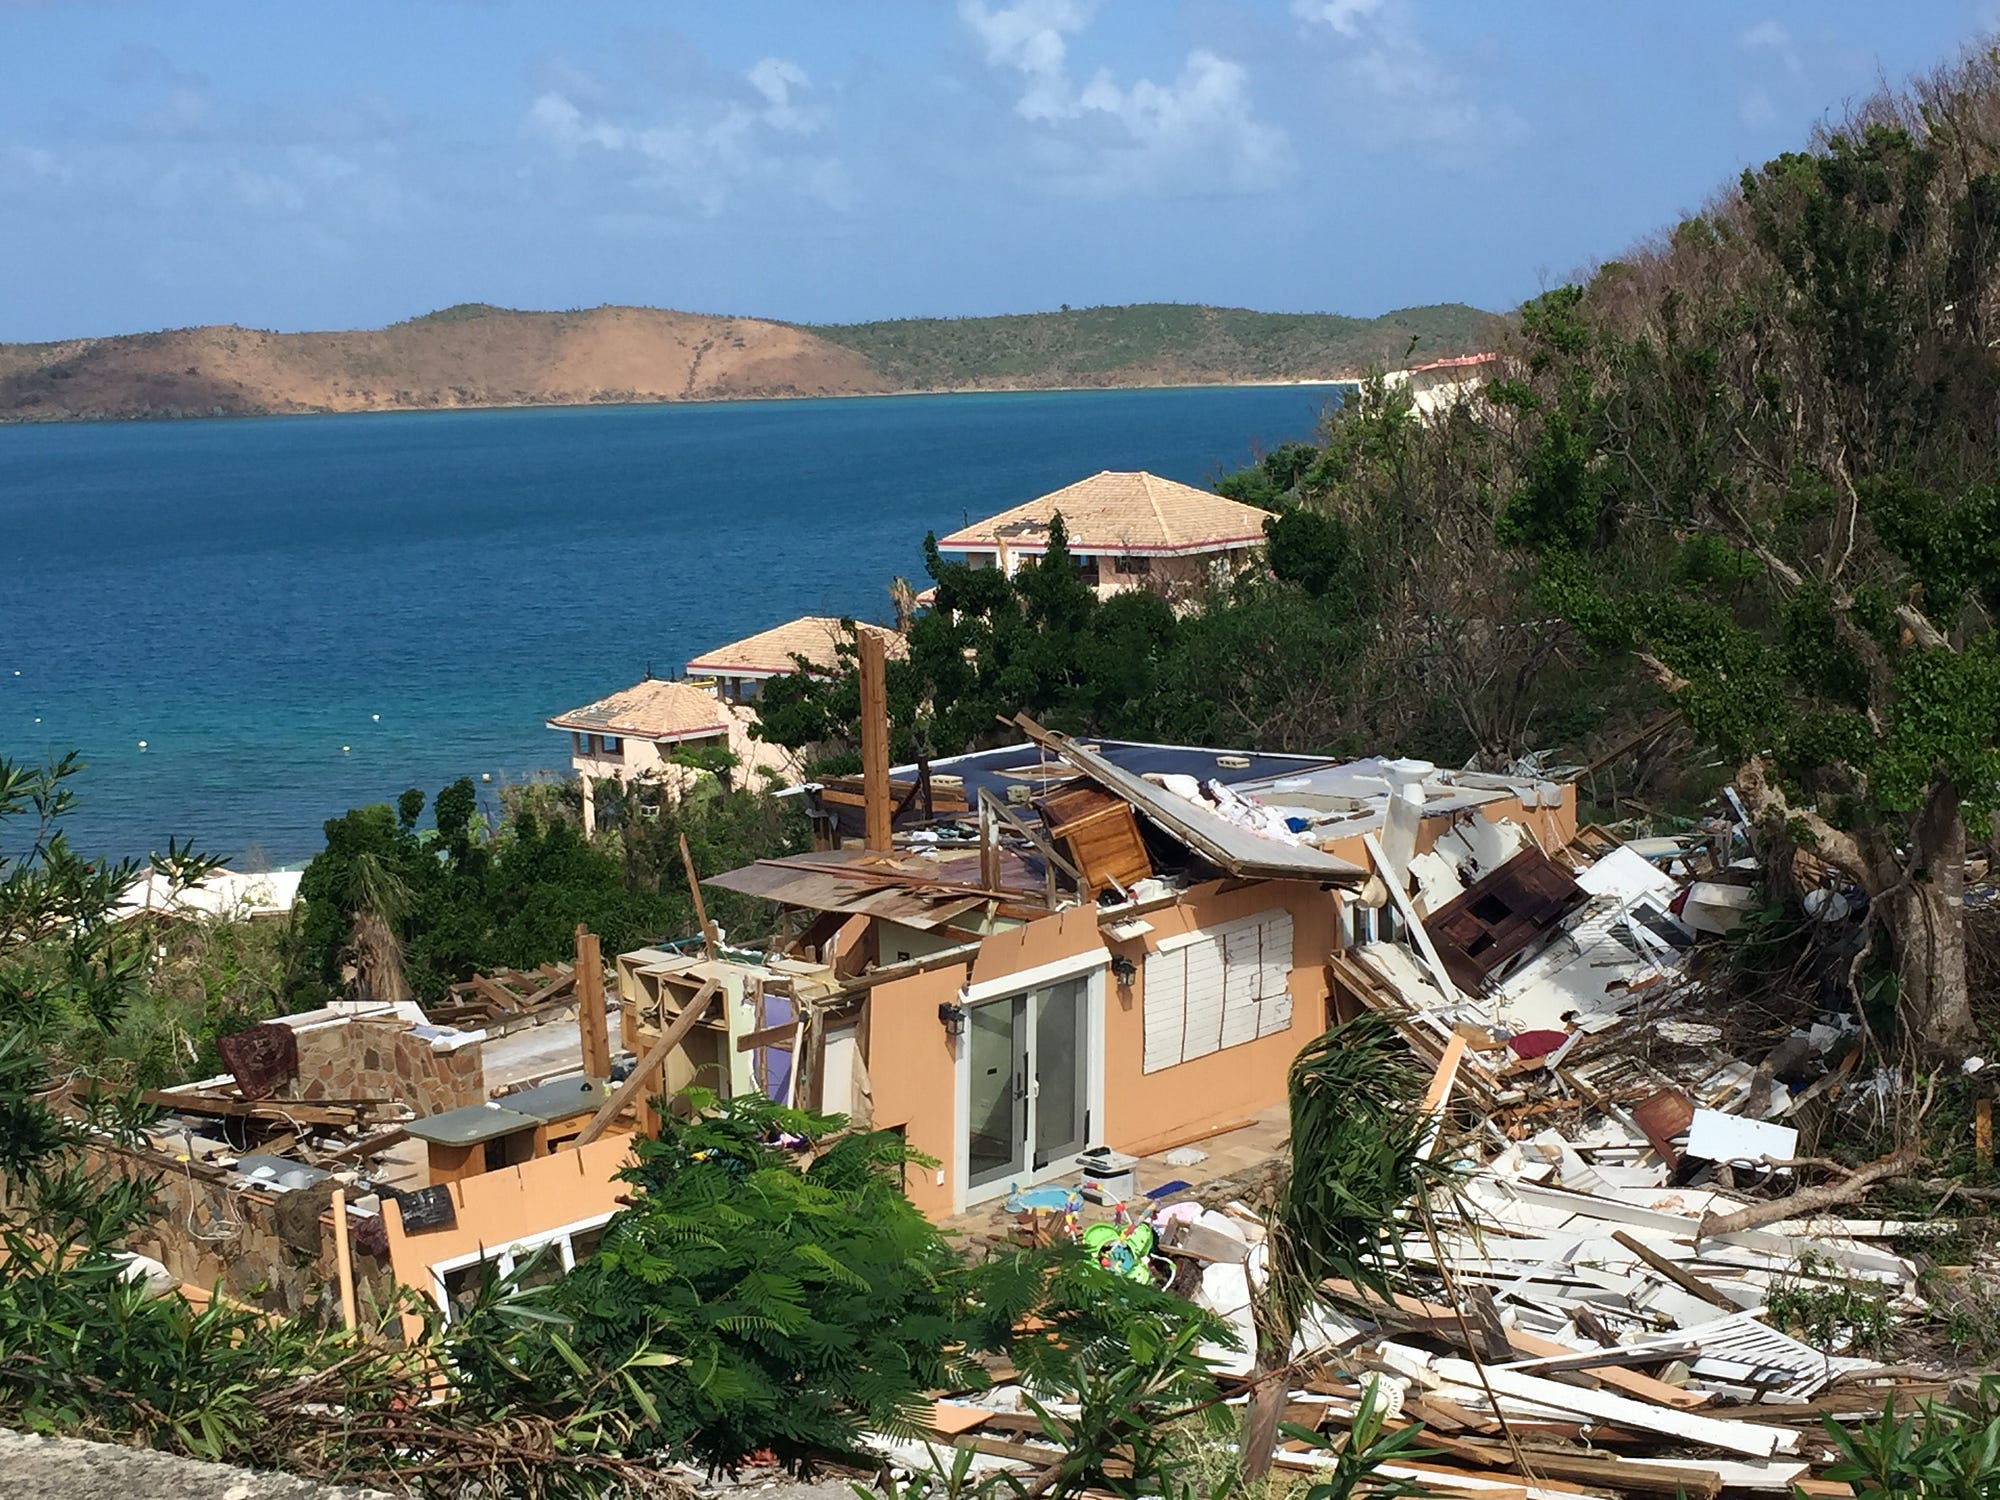 Building resilience to hurricanes in the British Virgin Islands